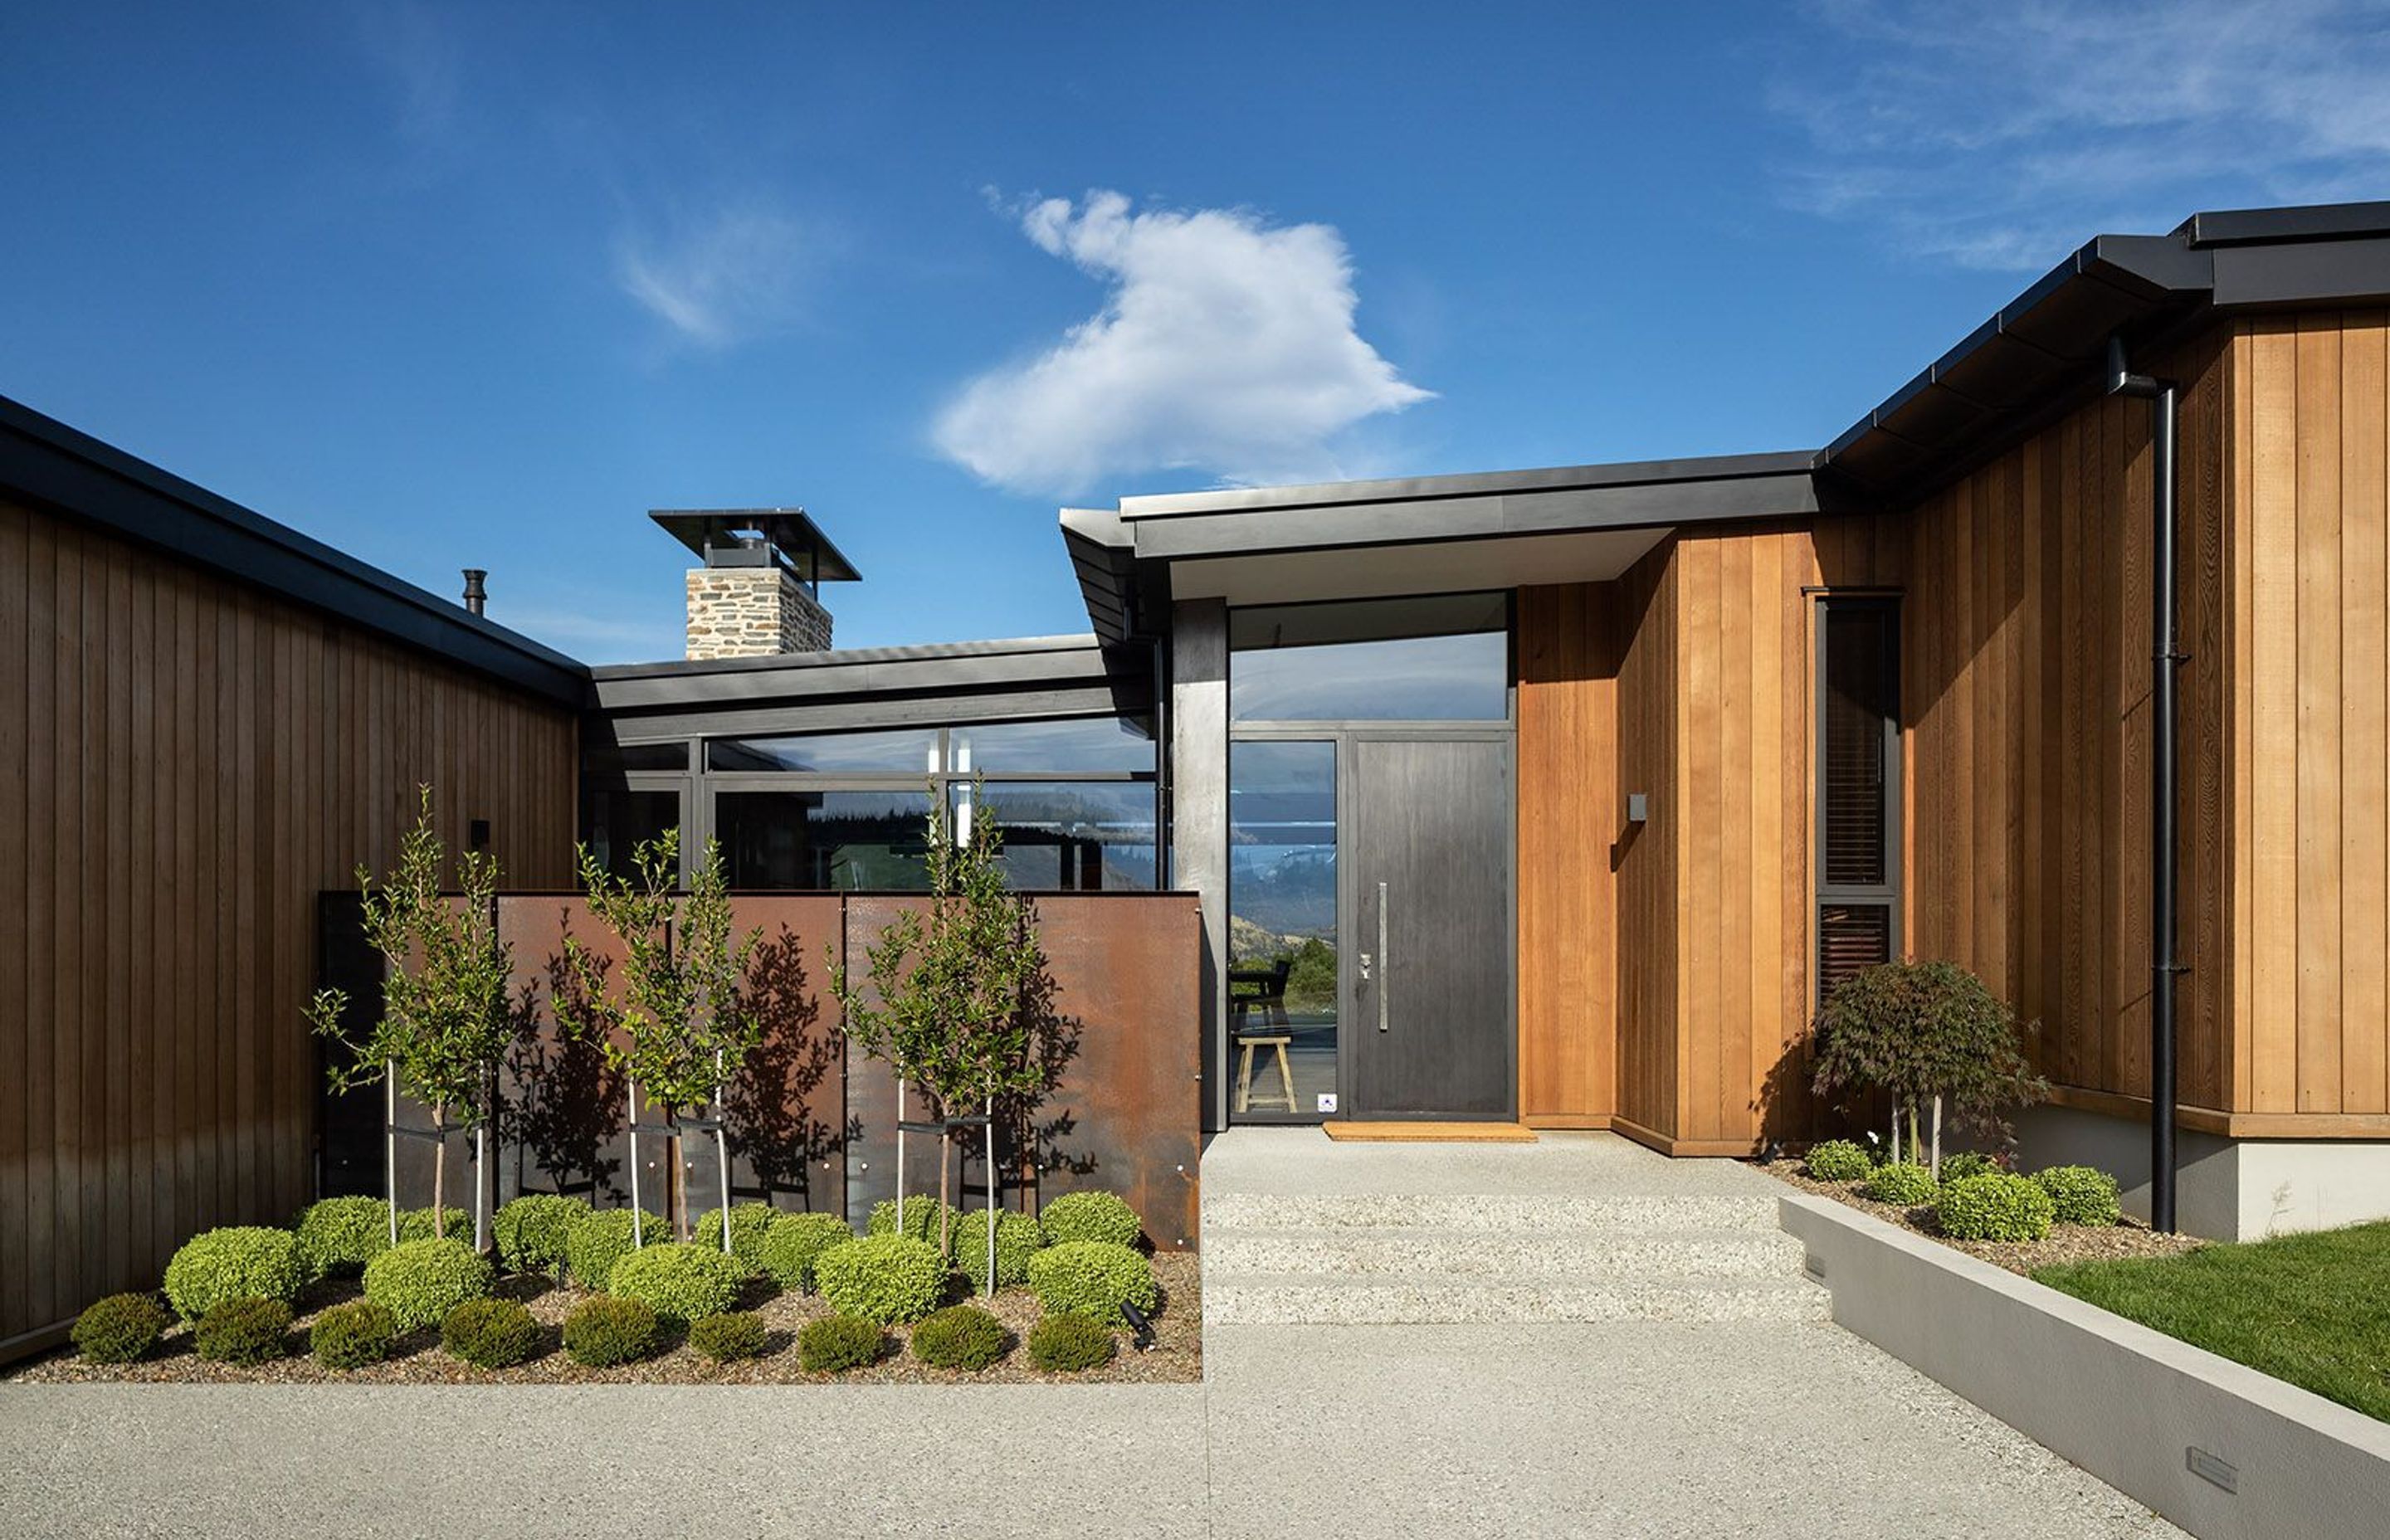 The mix of materials creates a contemporary feel for this Wanaka holiday home and also provides a high level of privacy from the street.